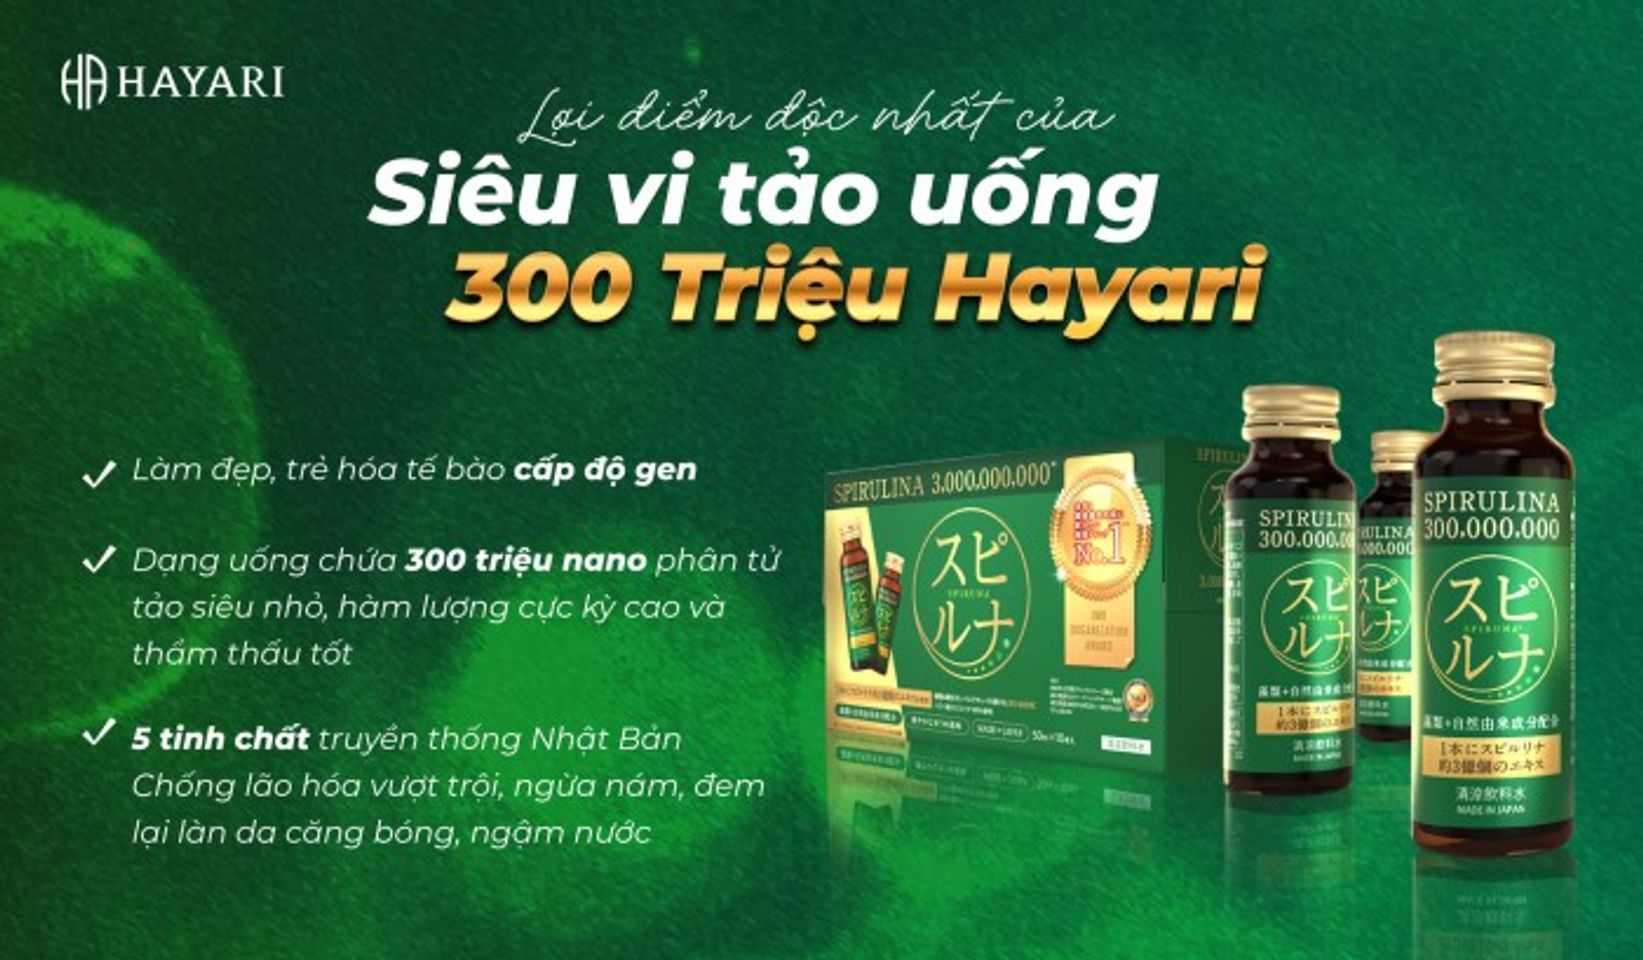 A green and gold advertisement with a bottle and a boxDescription automatically generated